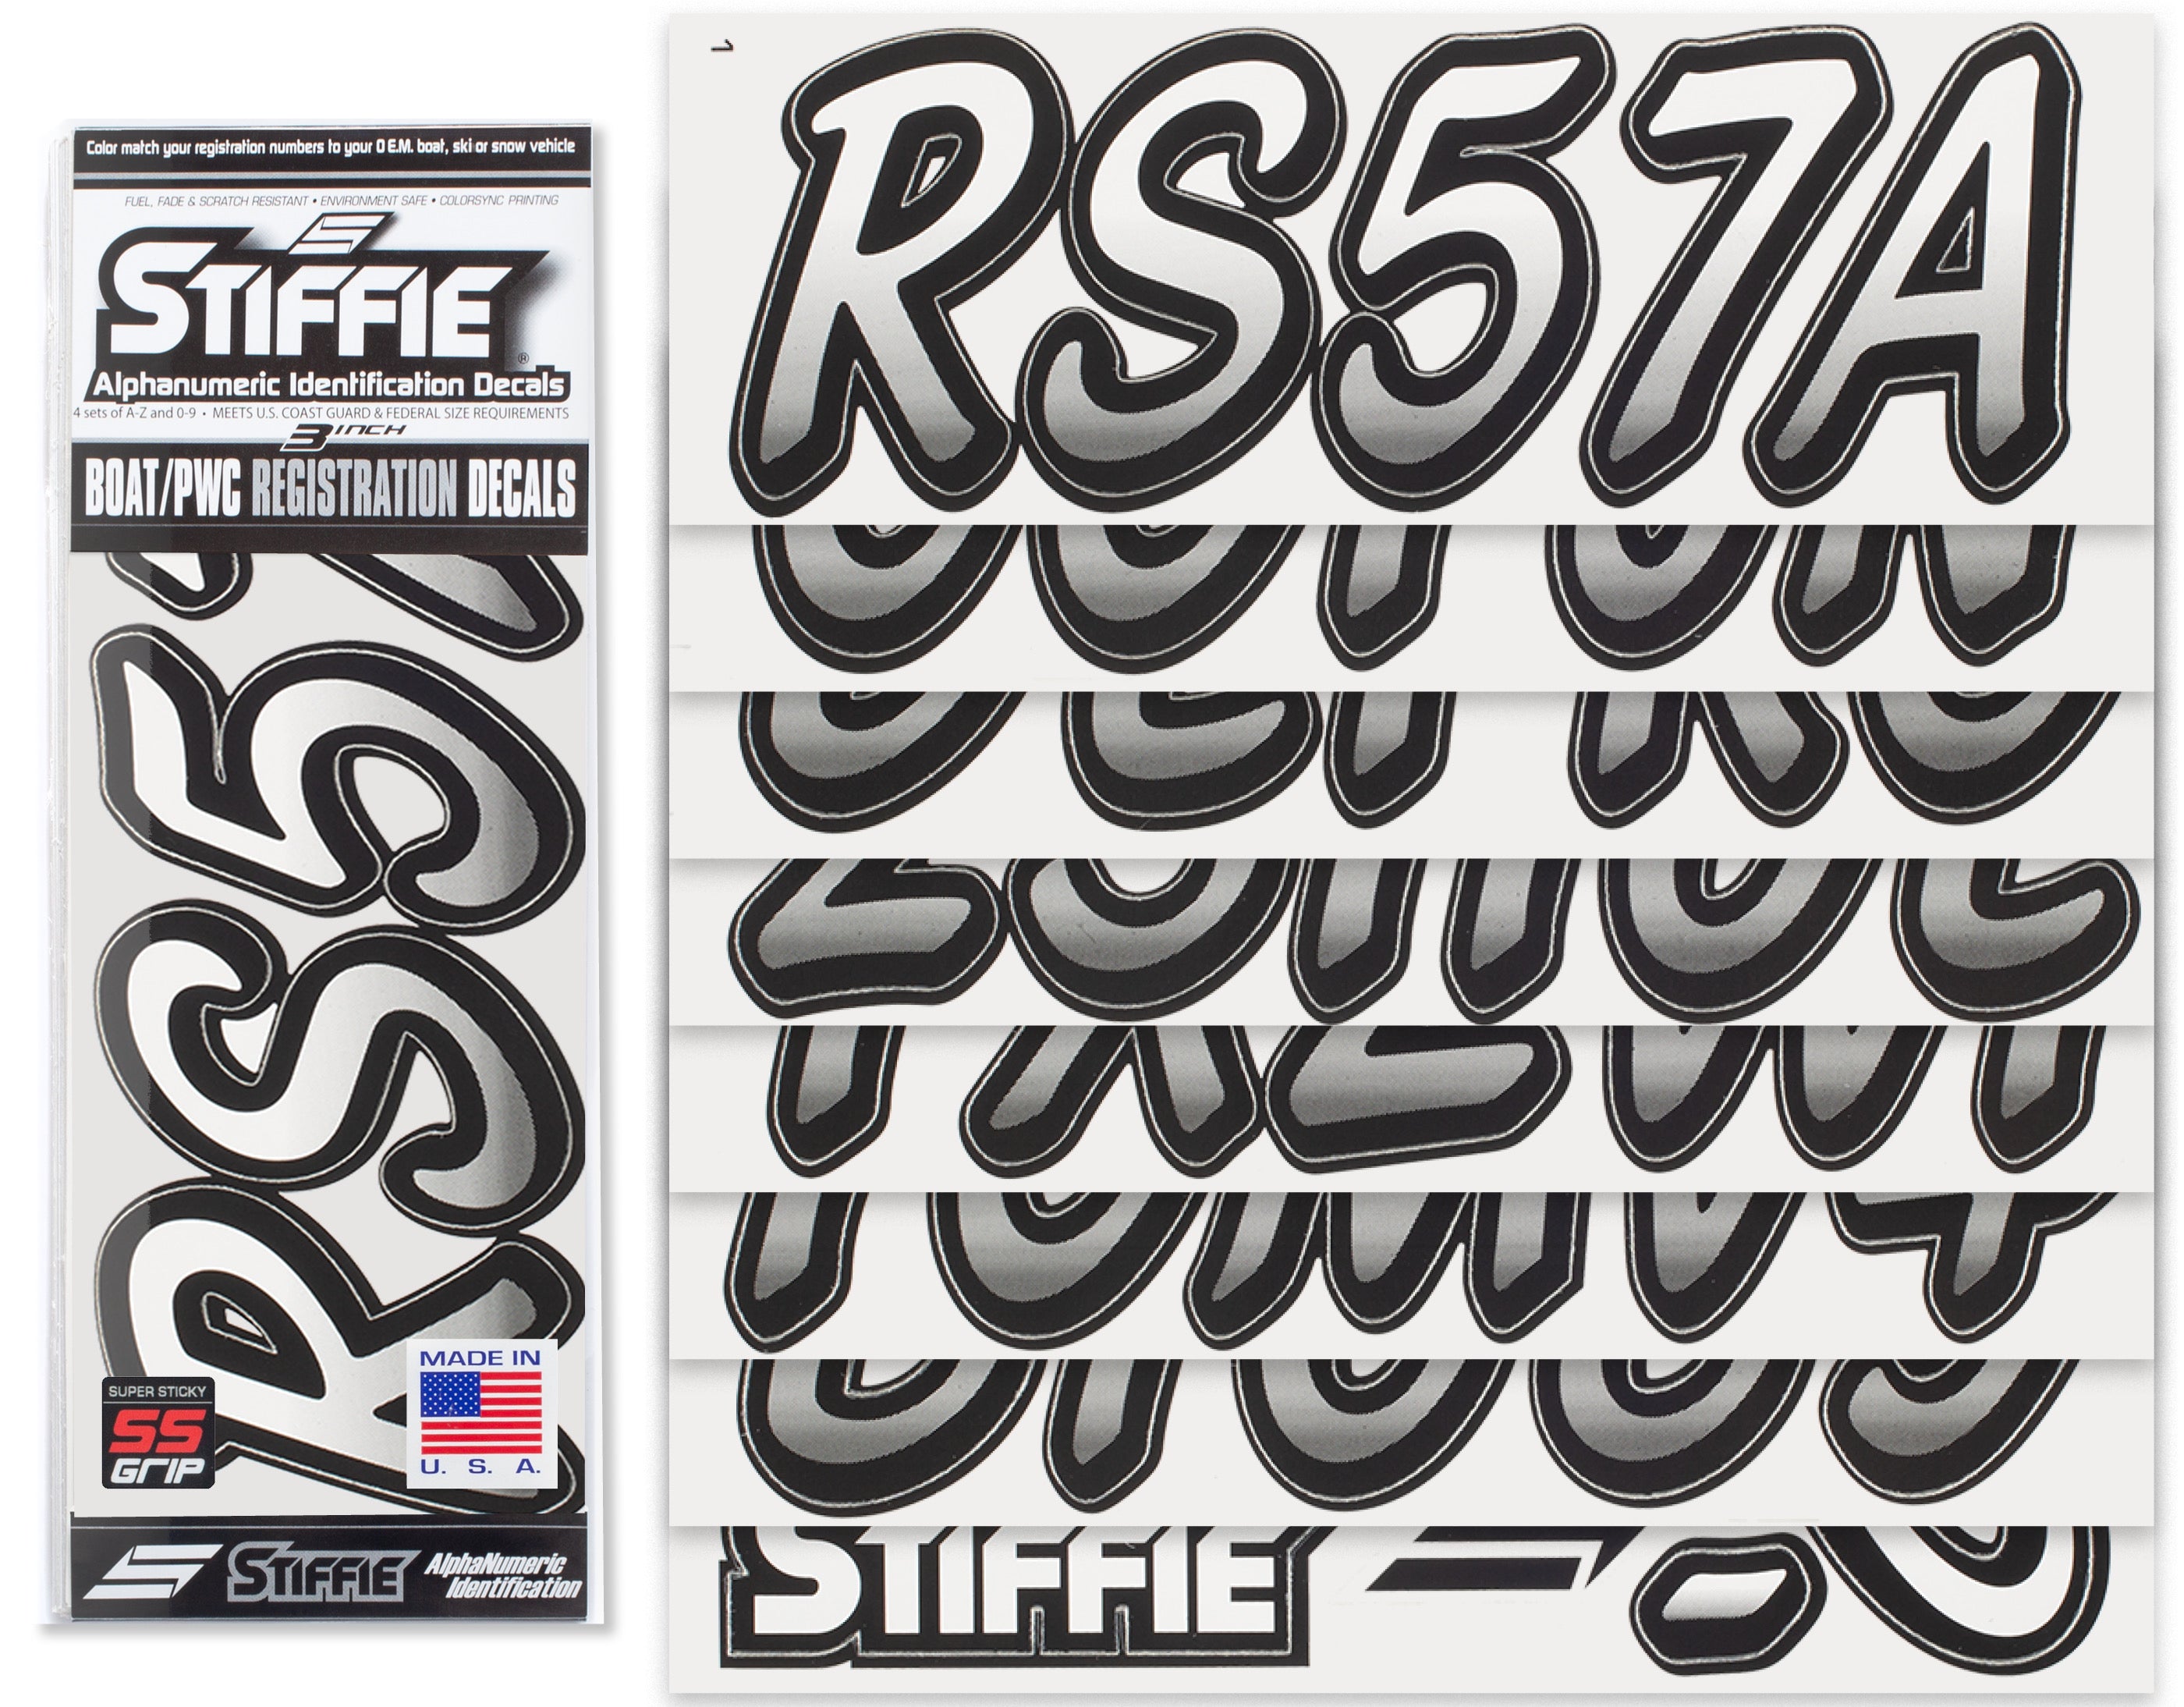 STIFFIE Whipline White/Black Super Sticky 3" Alpha Numeric Registration Identification Numbers Stickers Decals for Sea-Doo Spark, Inflatable Boats, Ribs, Hypalon/PVC, PWC and Boats.…